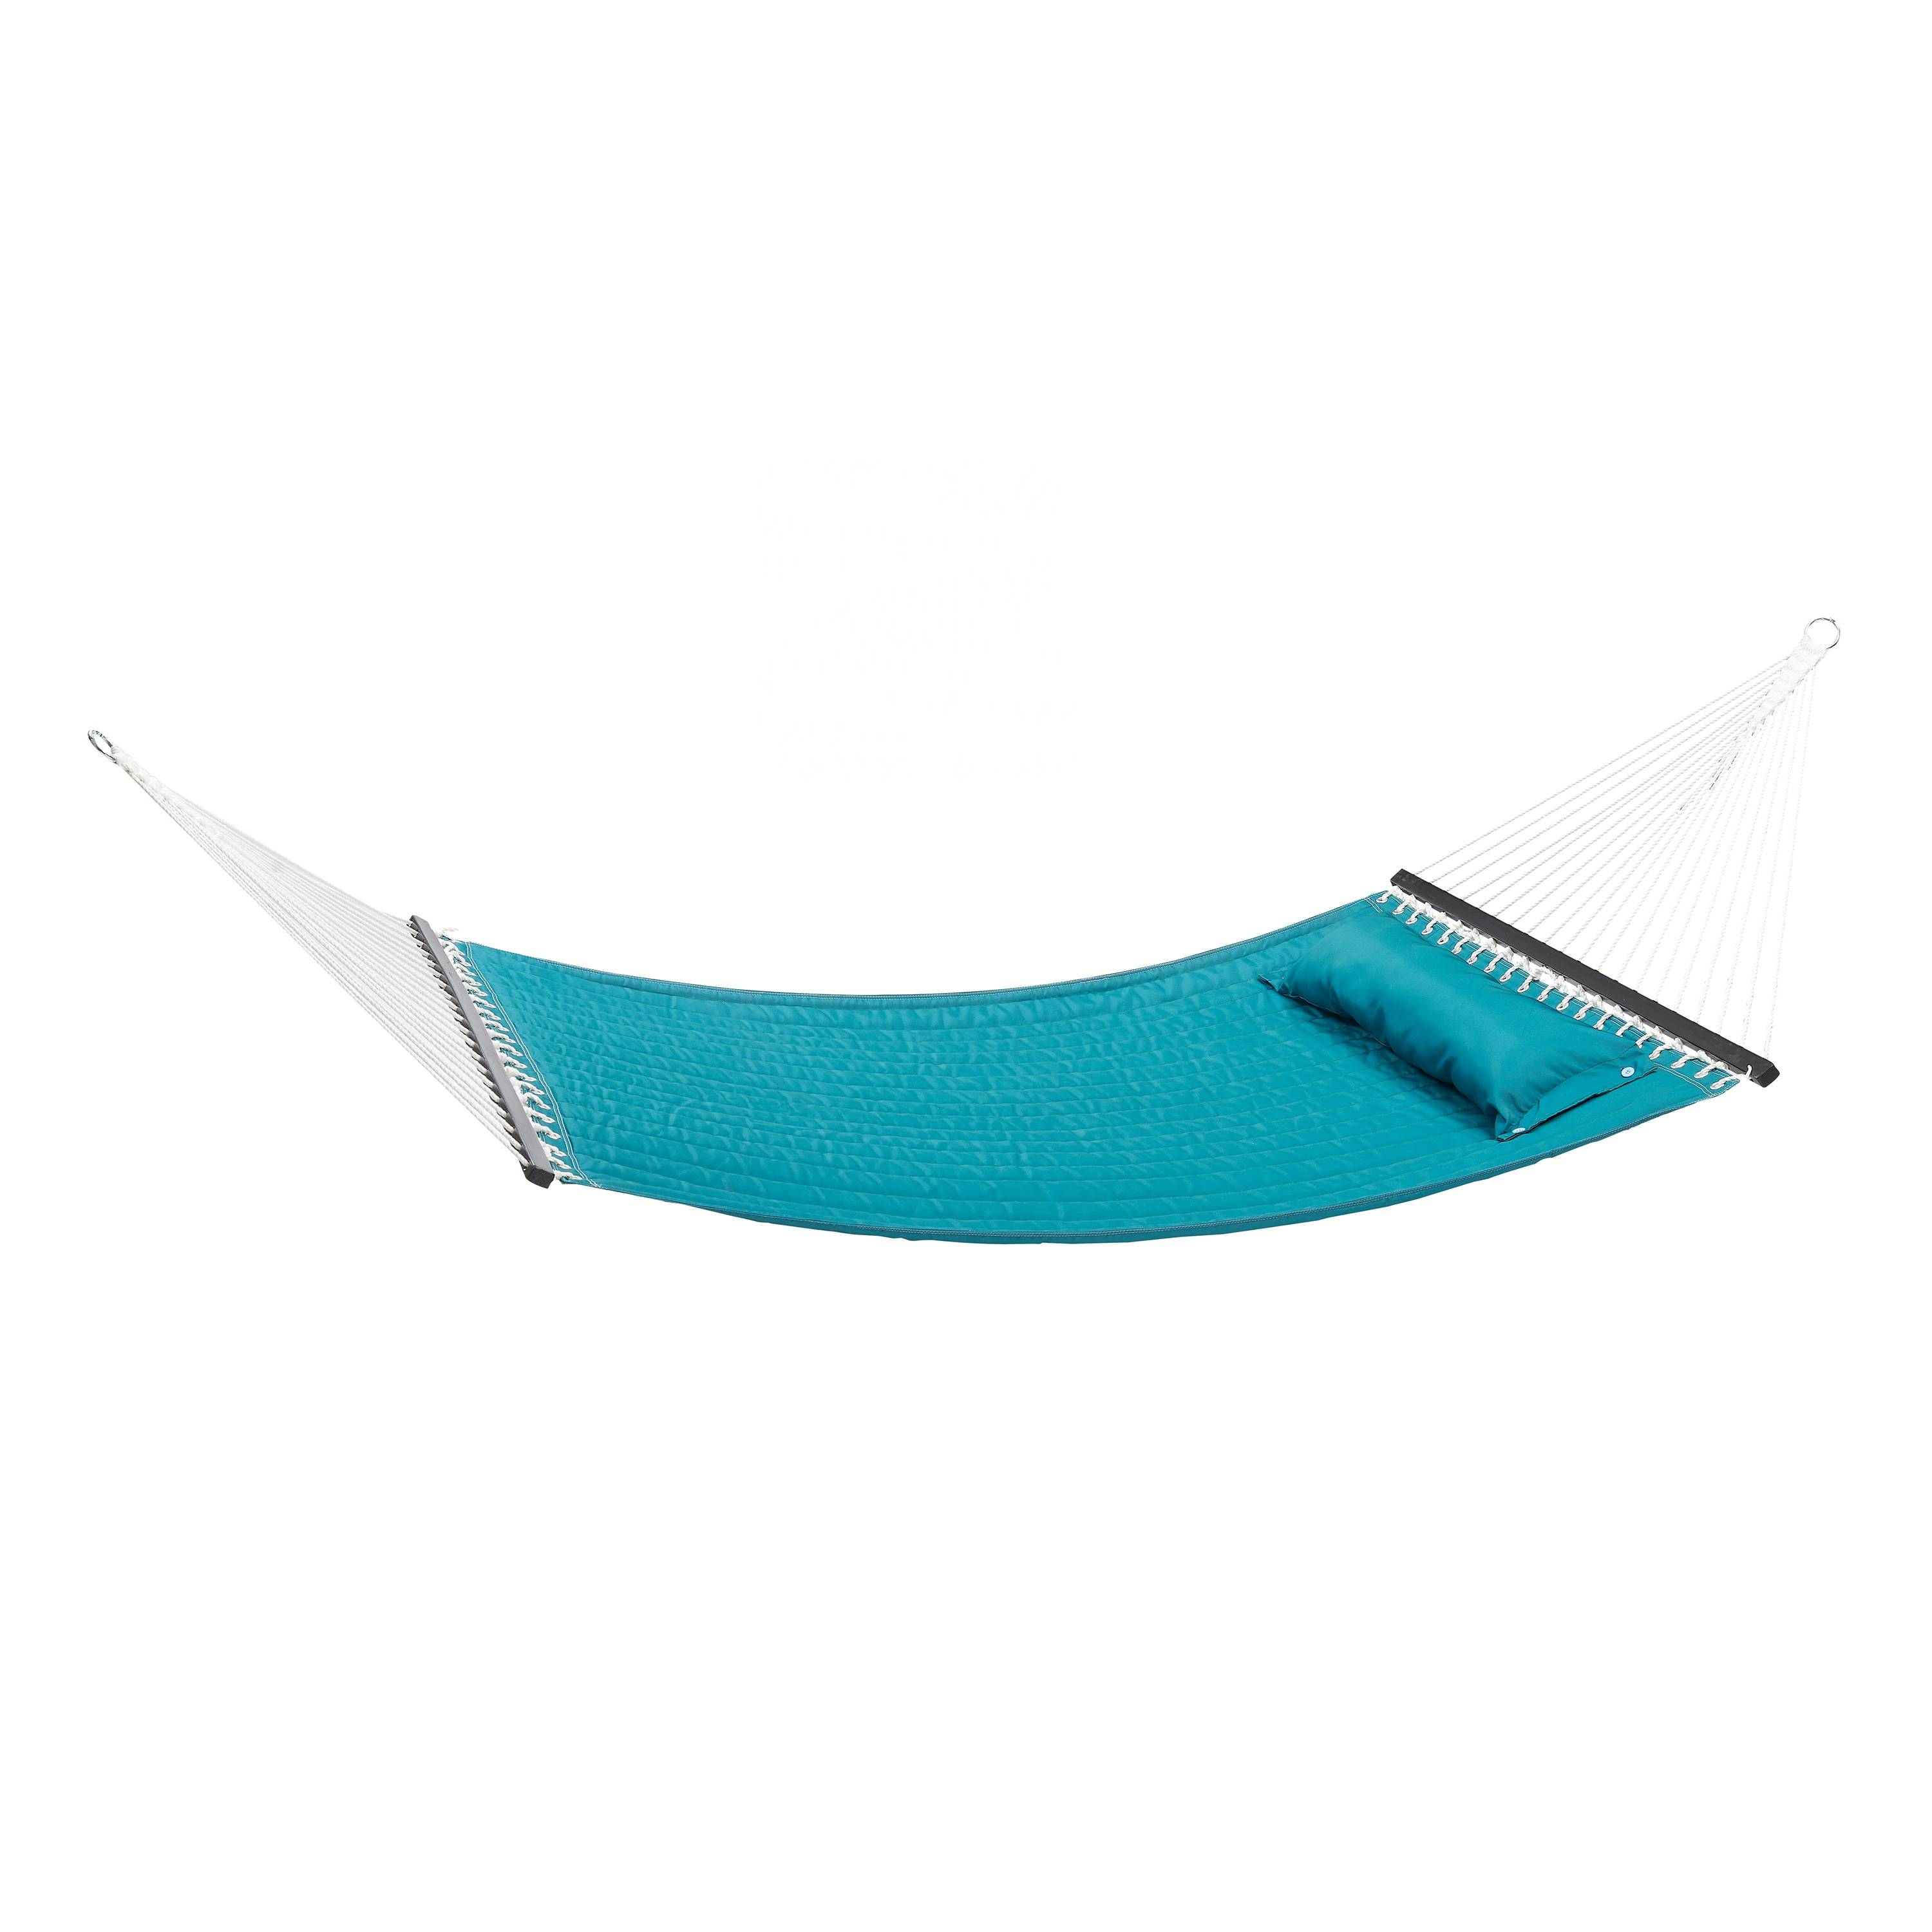 China wholesale Hanging Chair - High Quality Quilted Double Hammock with Pillow Teal Camping Hammock – Top Asian